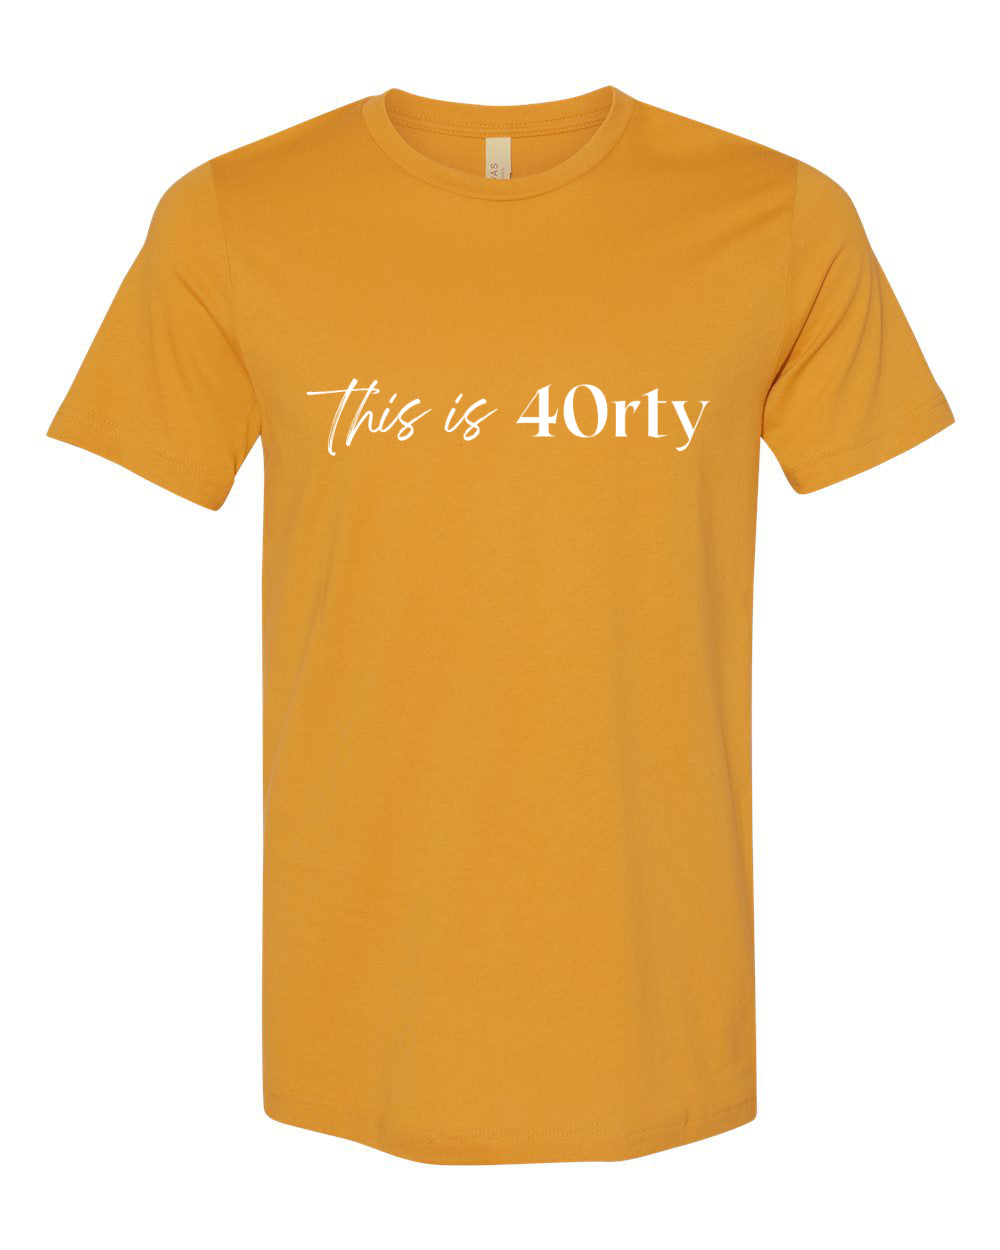 This is 40rty Shirt